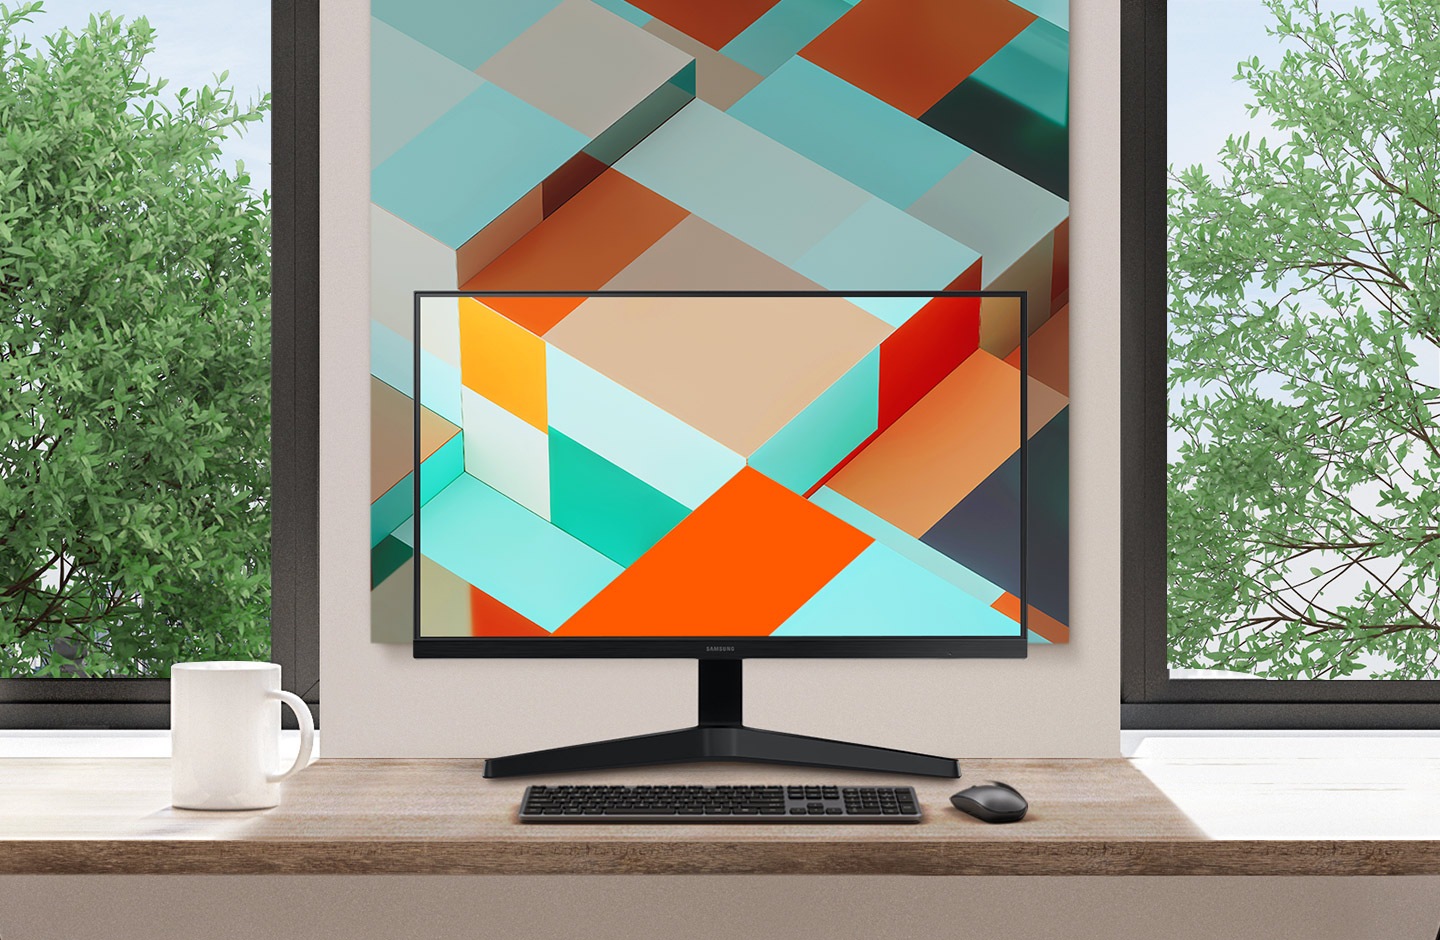 A desk is placed by the window. The screen of the monitor on the desk and the picture on the wall look like a single picture due to the thin bezel of the monitor.